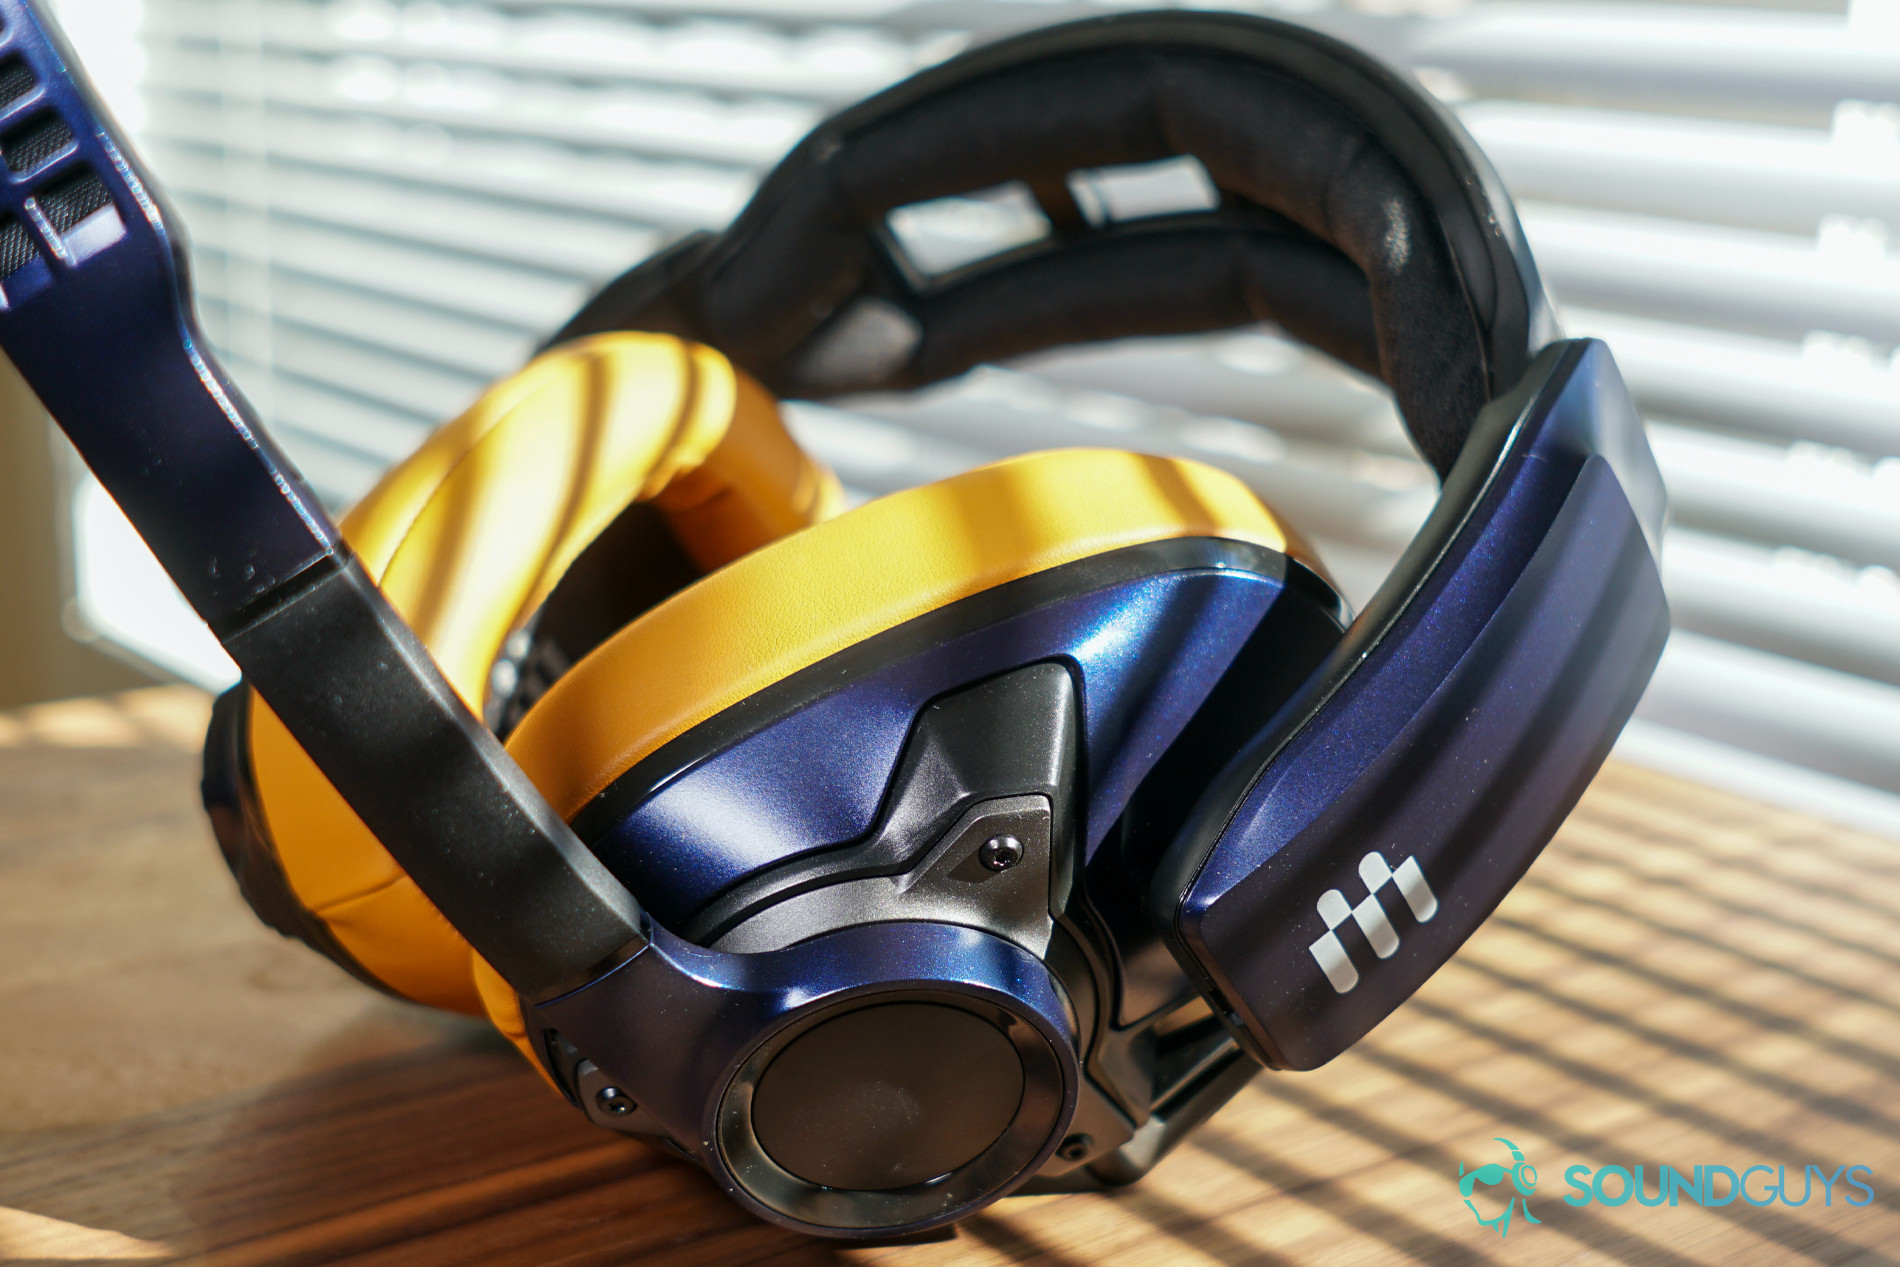 The EPOS Sennheiser GSP 602 gaming headset sits on wooden table in front of closed blinds